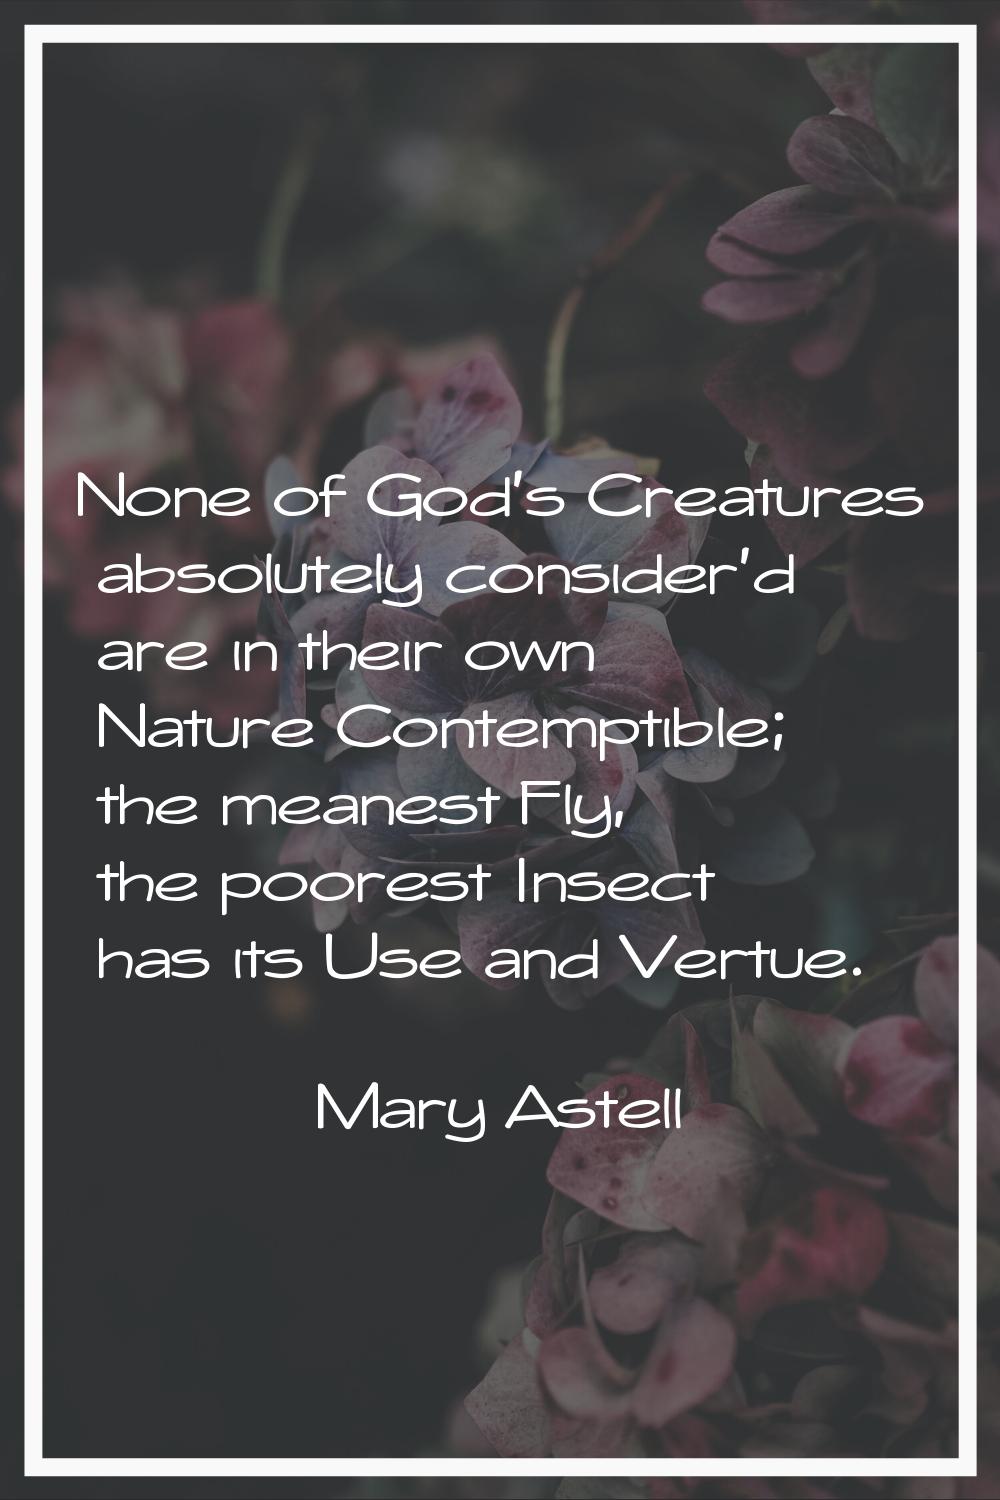 None of God's Creatures absolutely consider'd are in their own Nature Contemptible; the meanest Fly